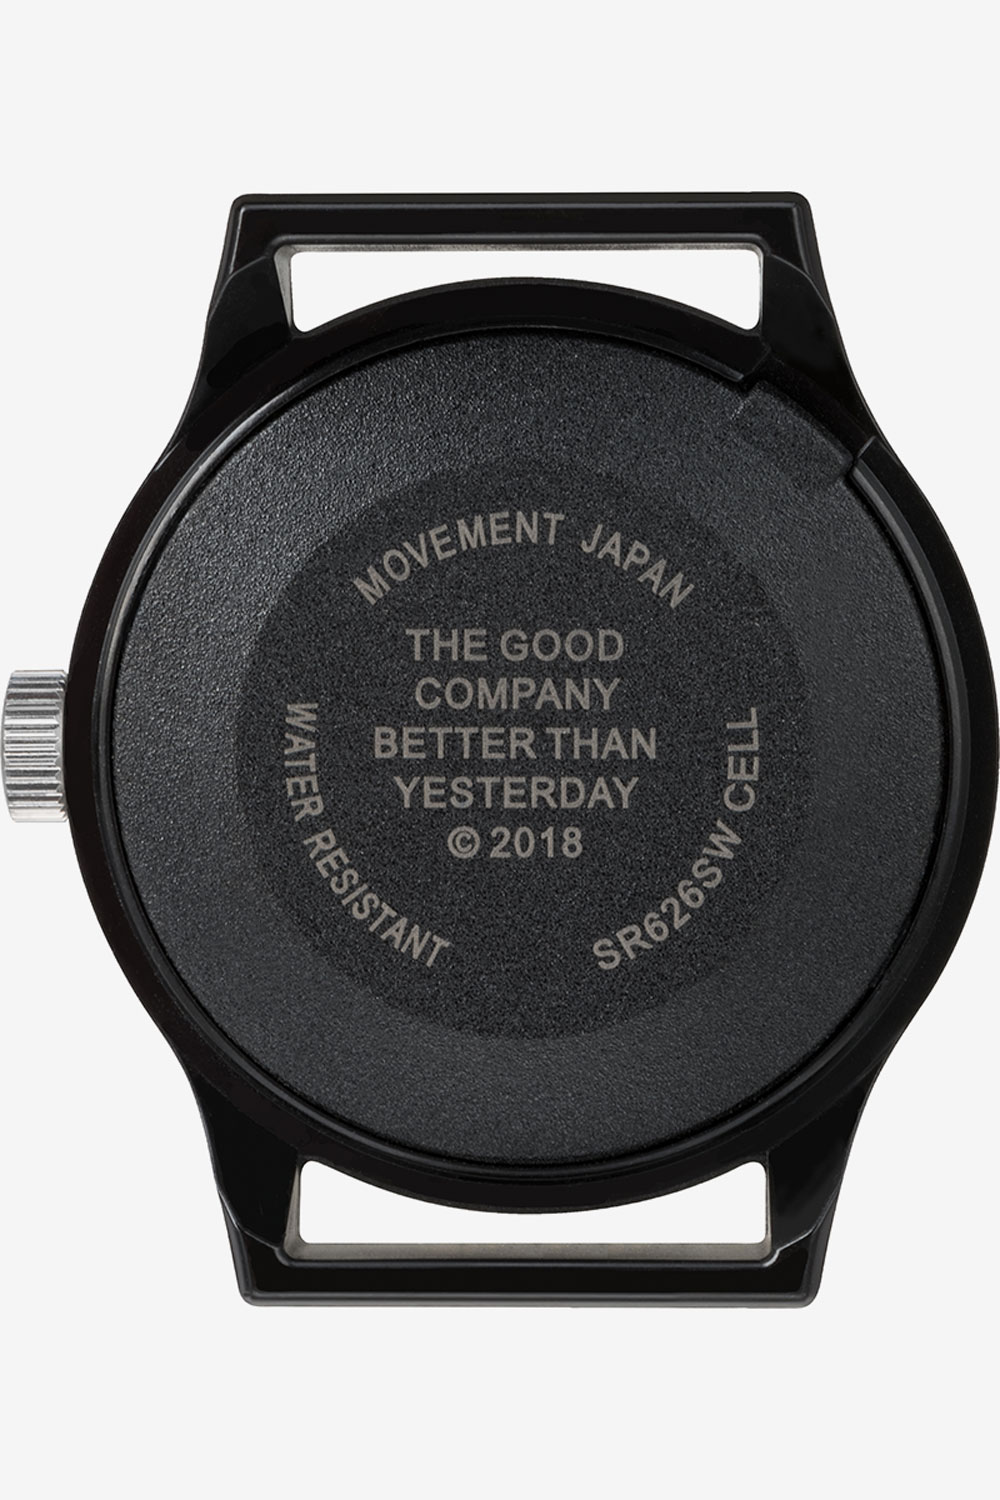 good company timex just dropped limited edition mk1 watch The Good Company timex mk1